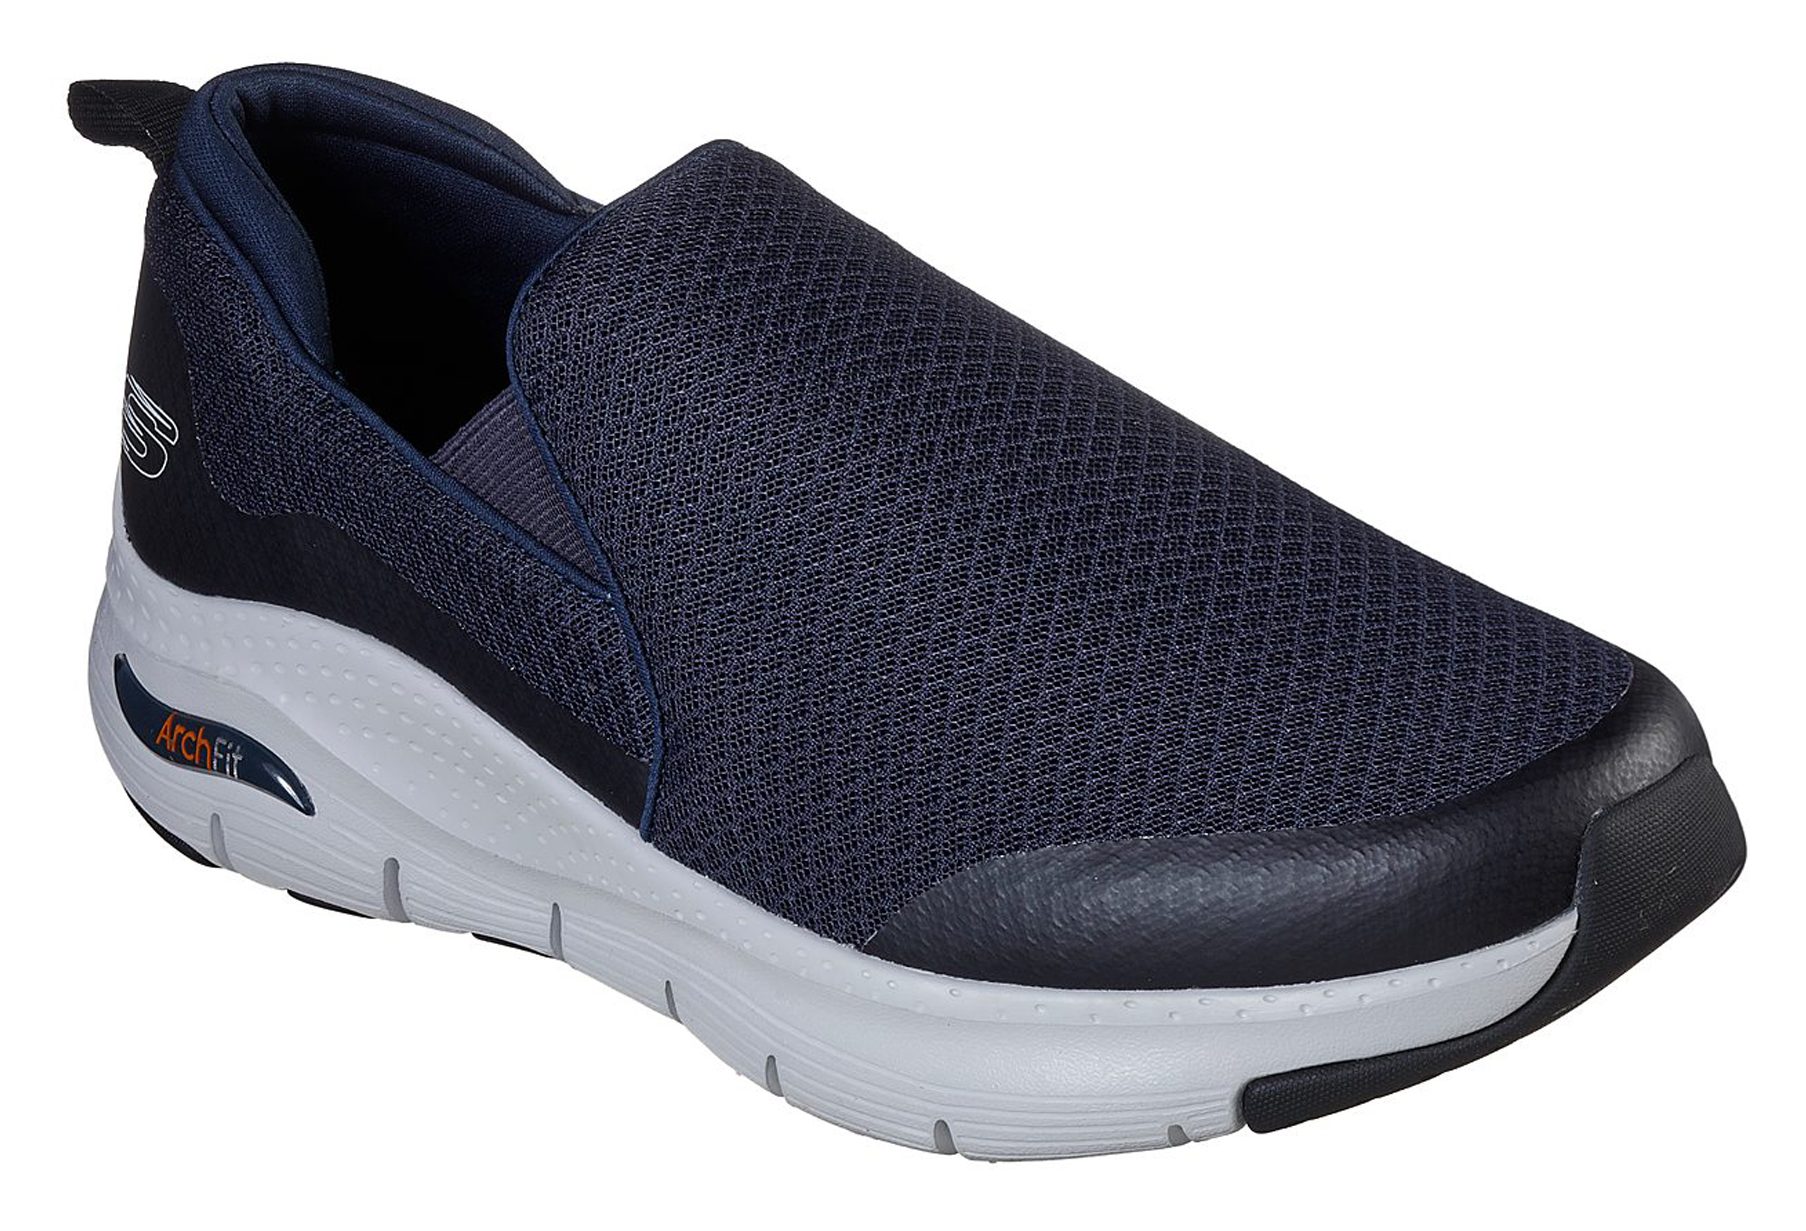 Skechers Arch Fit - Banlin Navy 232043 NVY - Trainers - Humphries Shoes